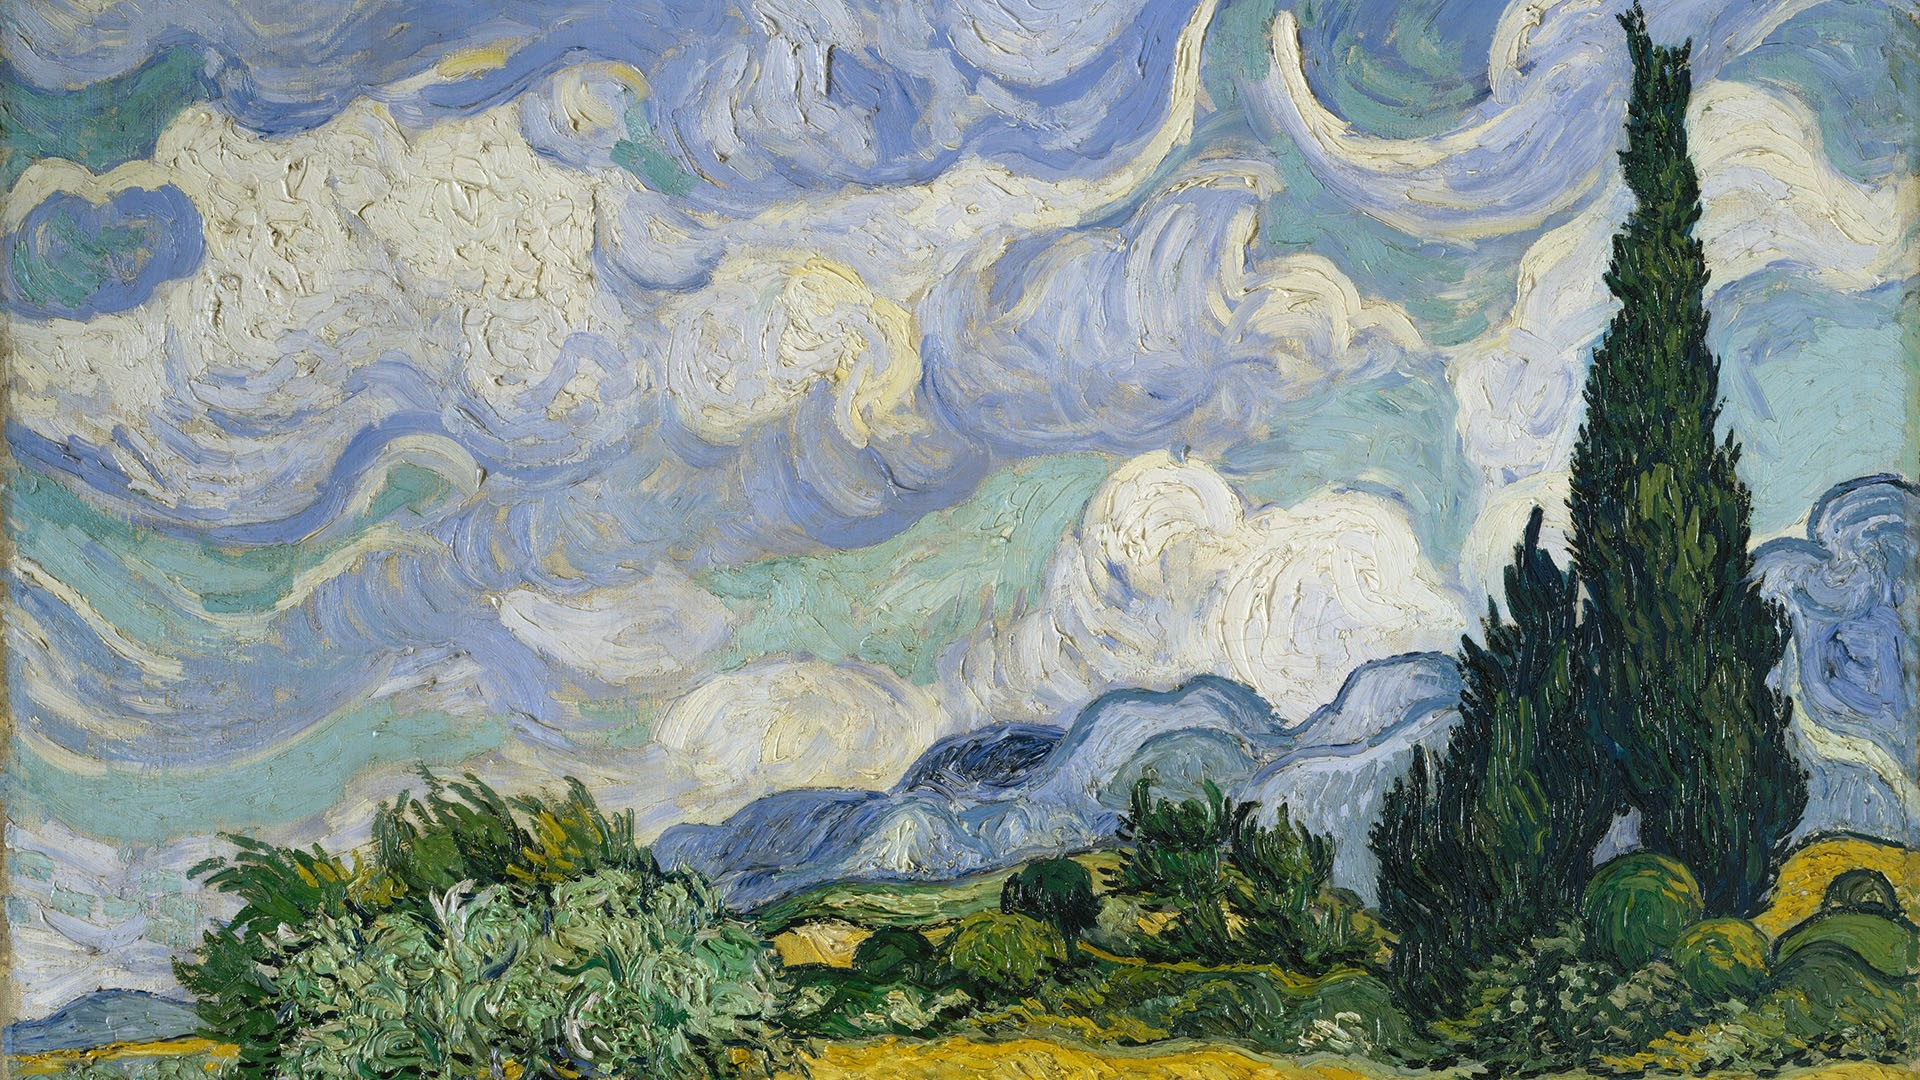 1920x1080 Wheat Field with Cypresses, 1889, painting by Vincent van Gogh | Windows 10 Spotlight Images